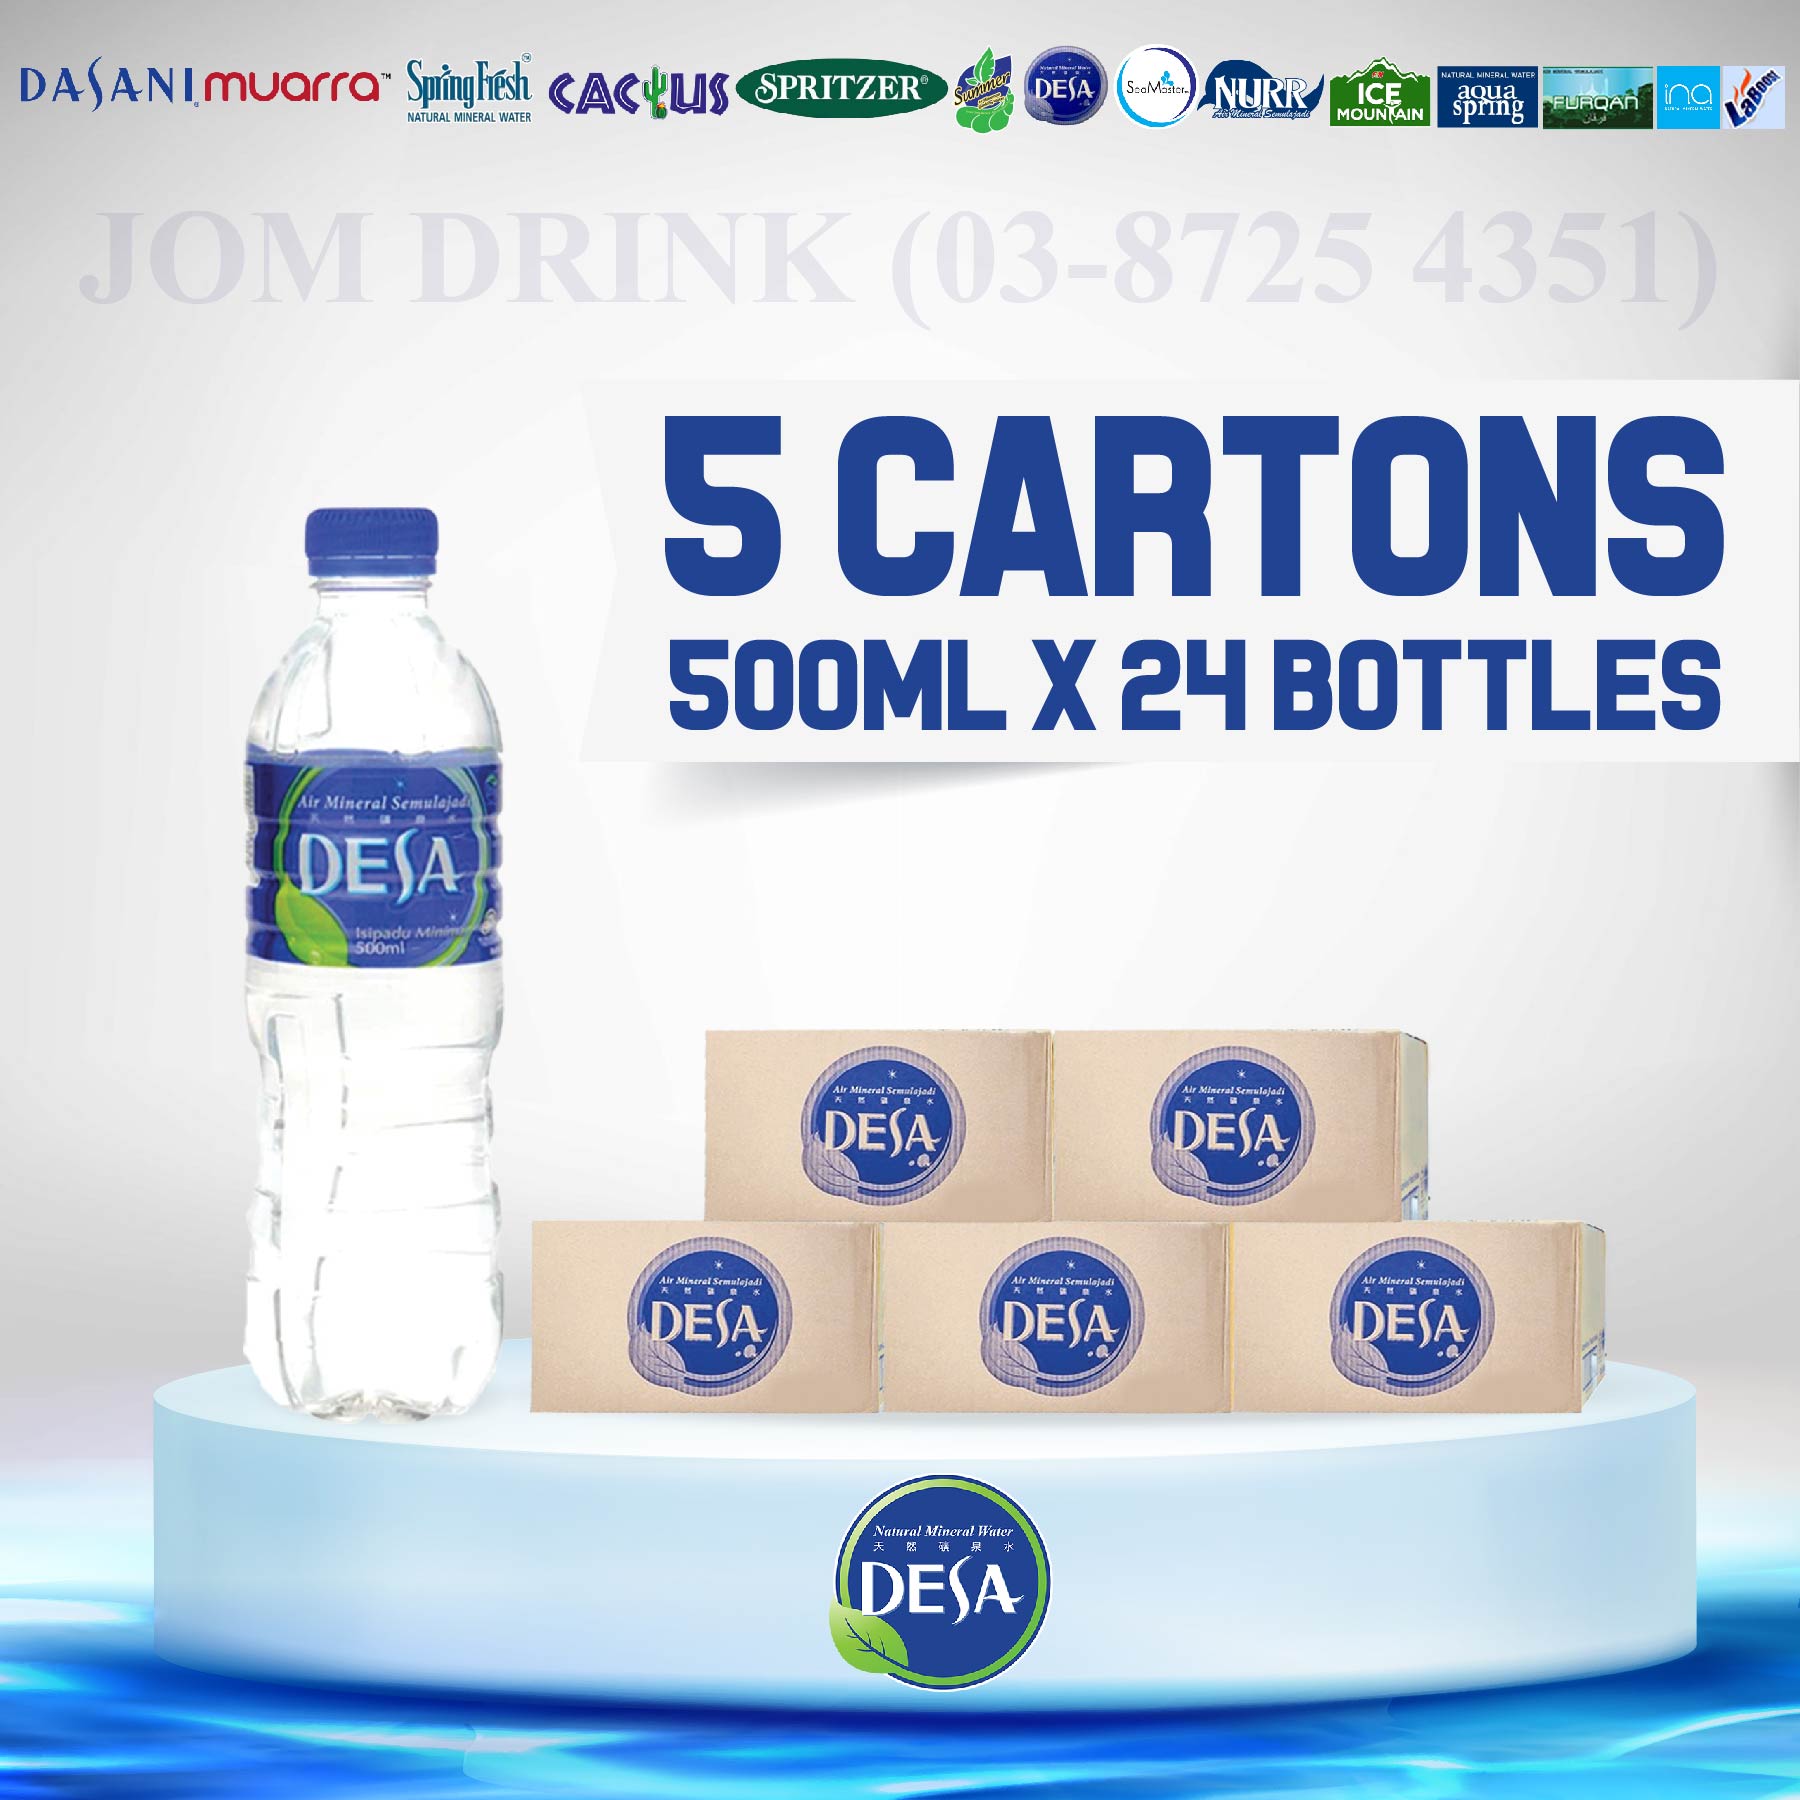 PACKAGES OF 5 BOXES : DESA MINERAL WATER 500ML